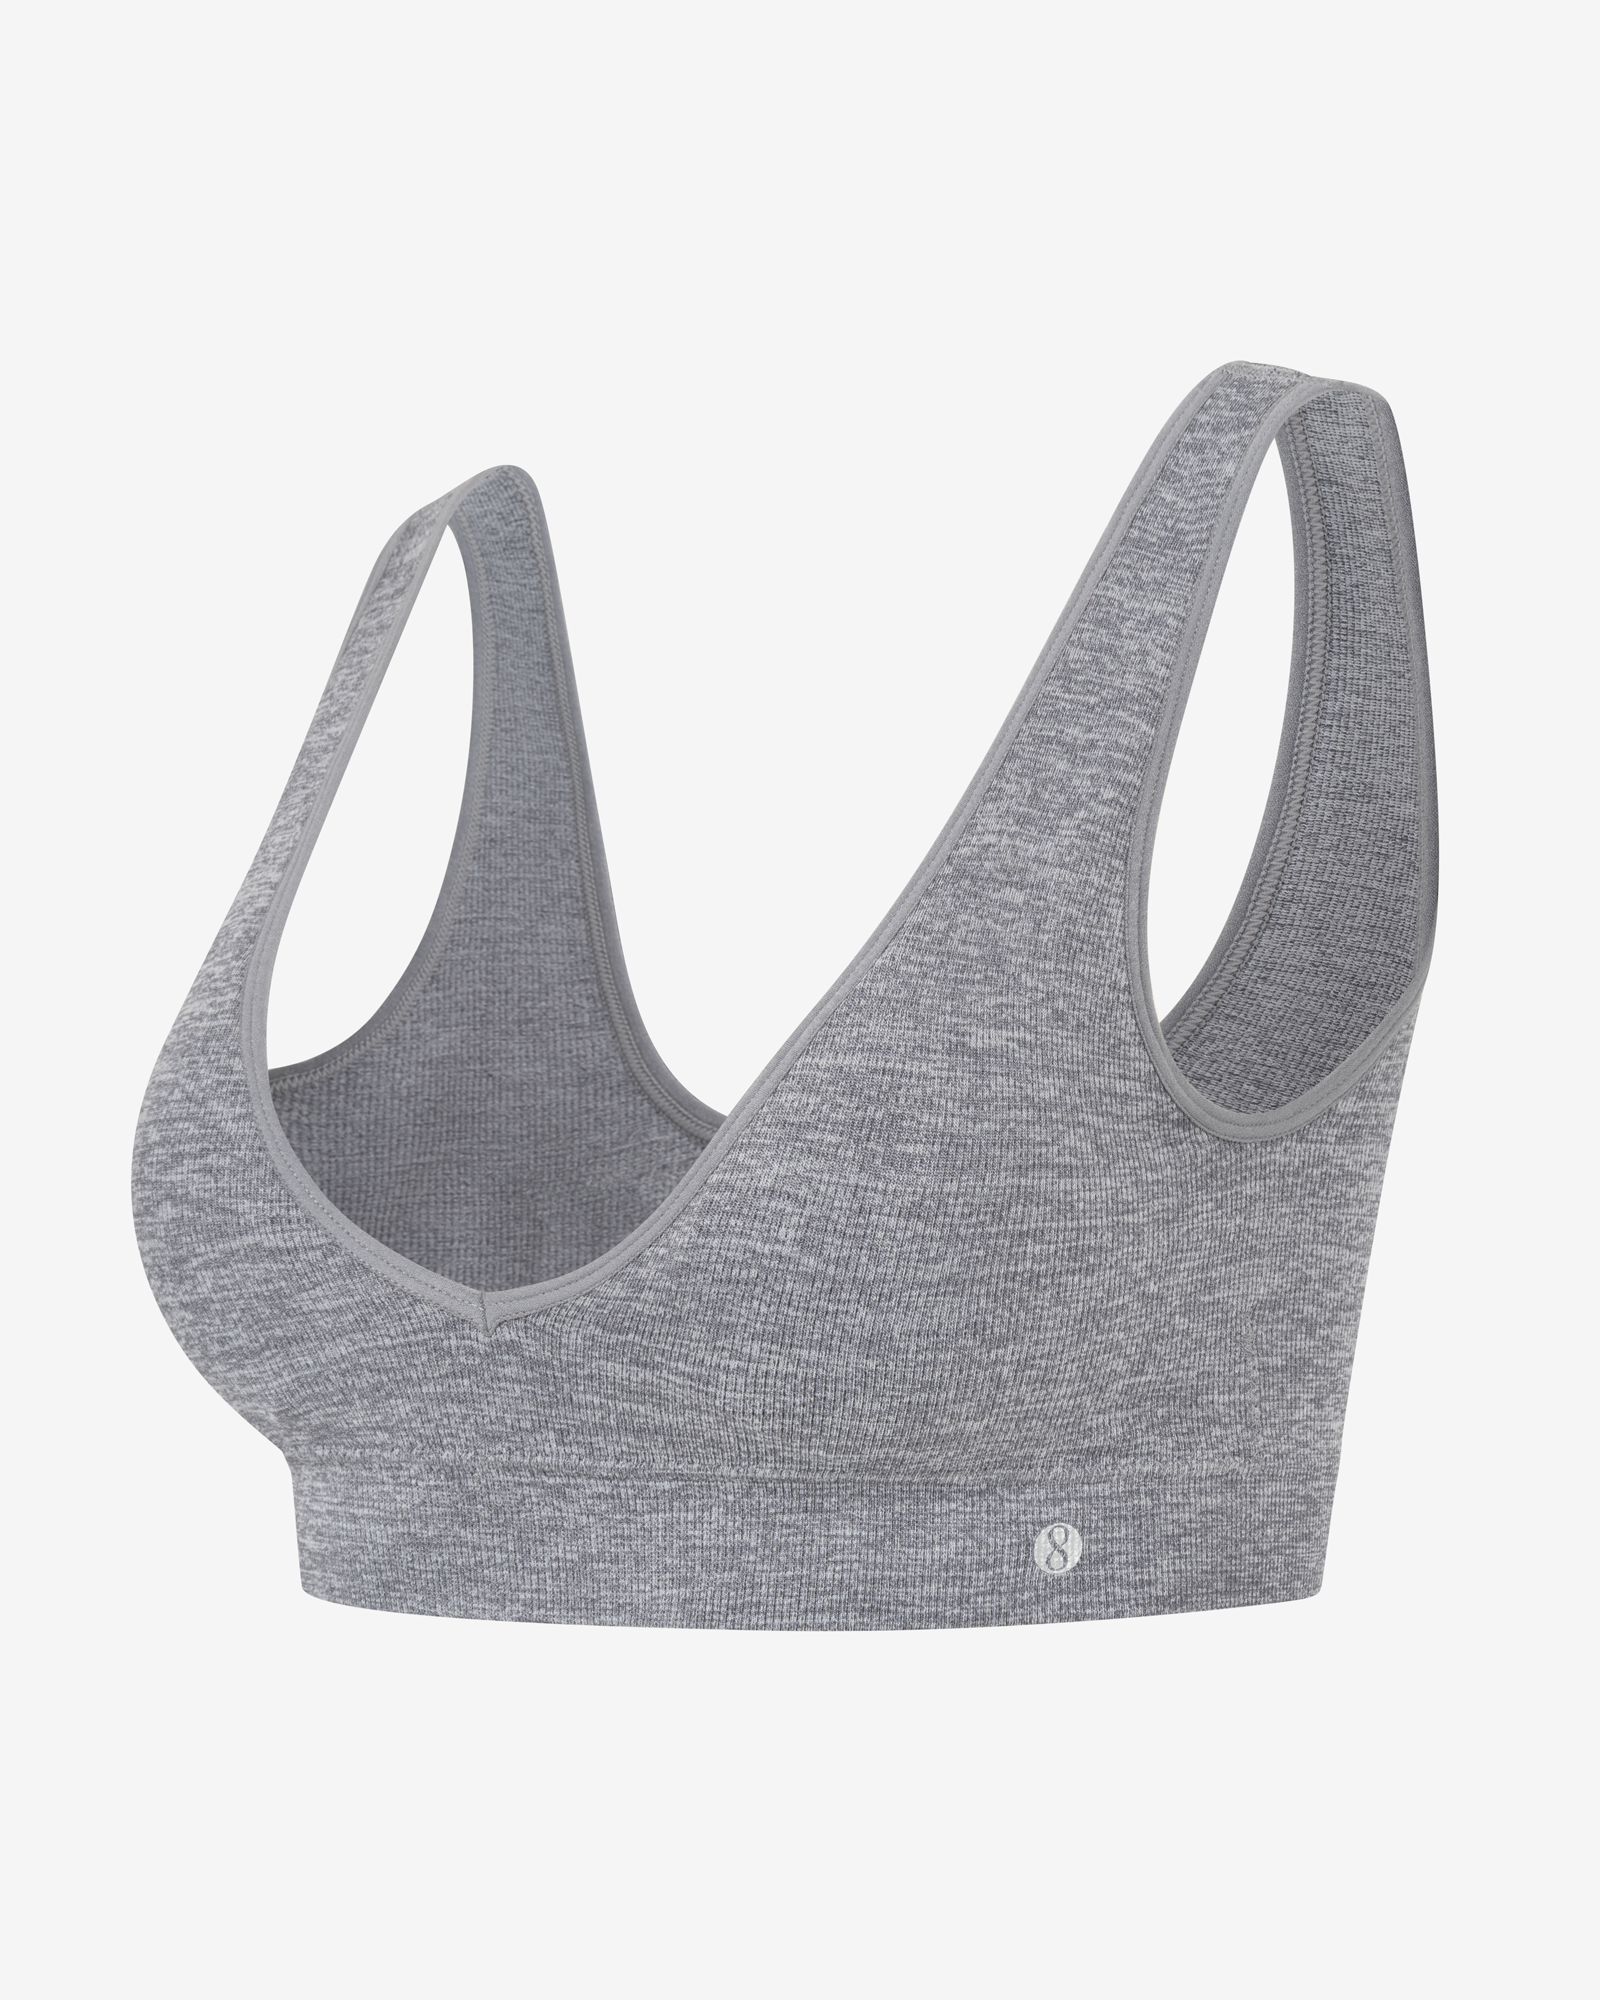 LAYER 8 MAXIMUM SUPPORT SIZE 3XL Sports Bra HEATHER GRAY Fitted Front  Zipper-NEW